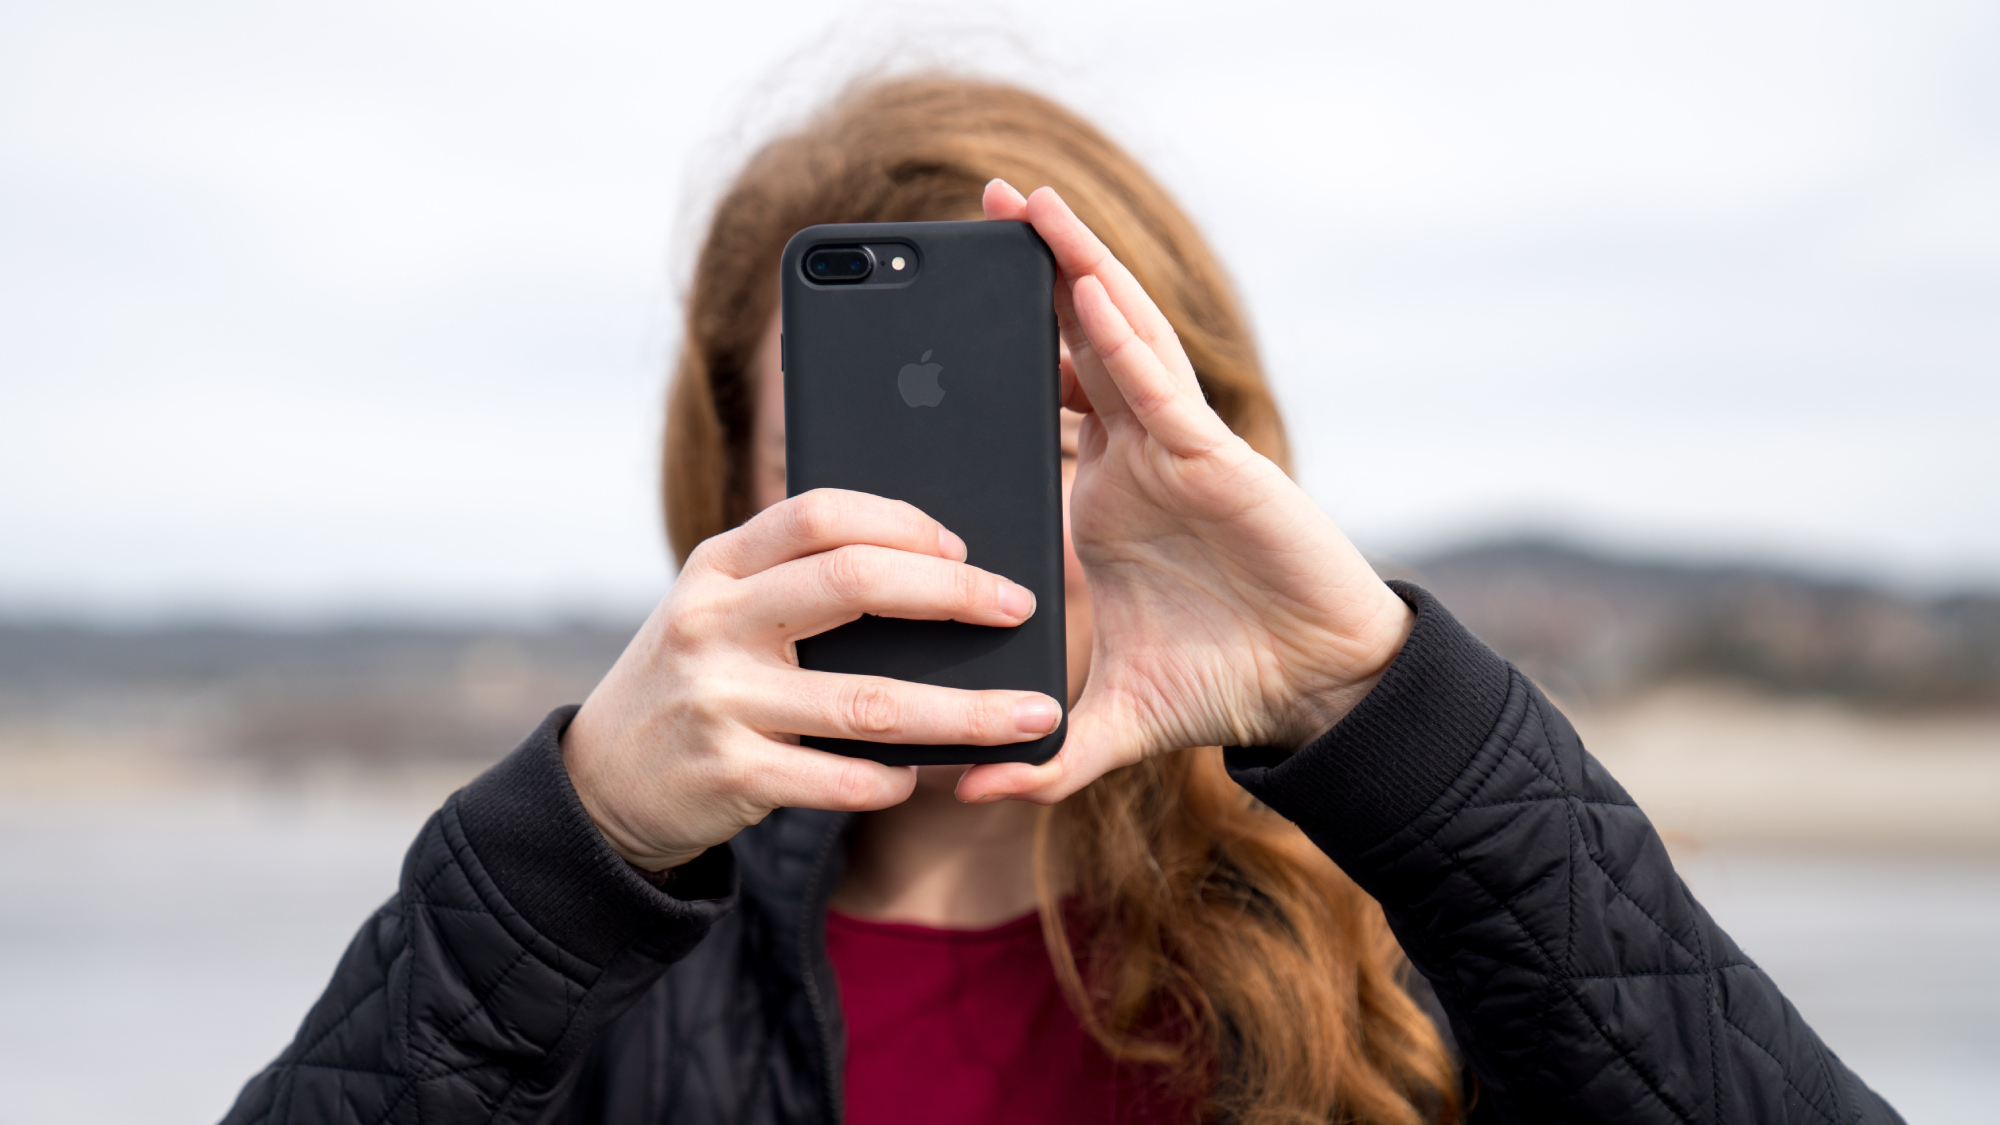 A red-haired woman facing the camera, using her black iPhone to take a photo, with the phone covering her face.